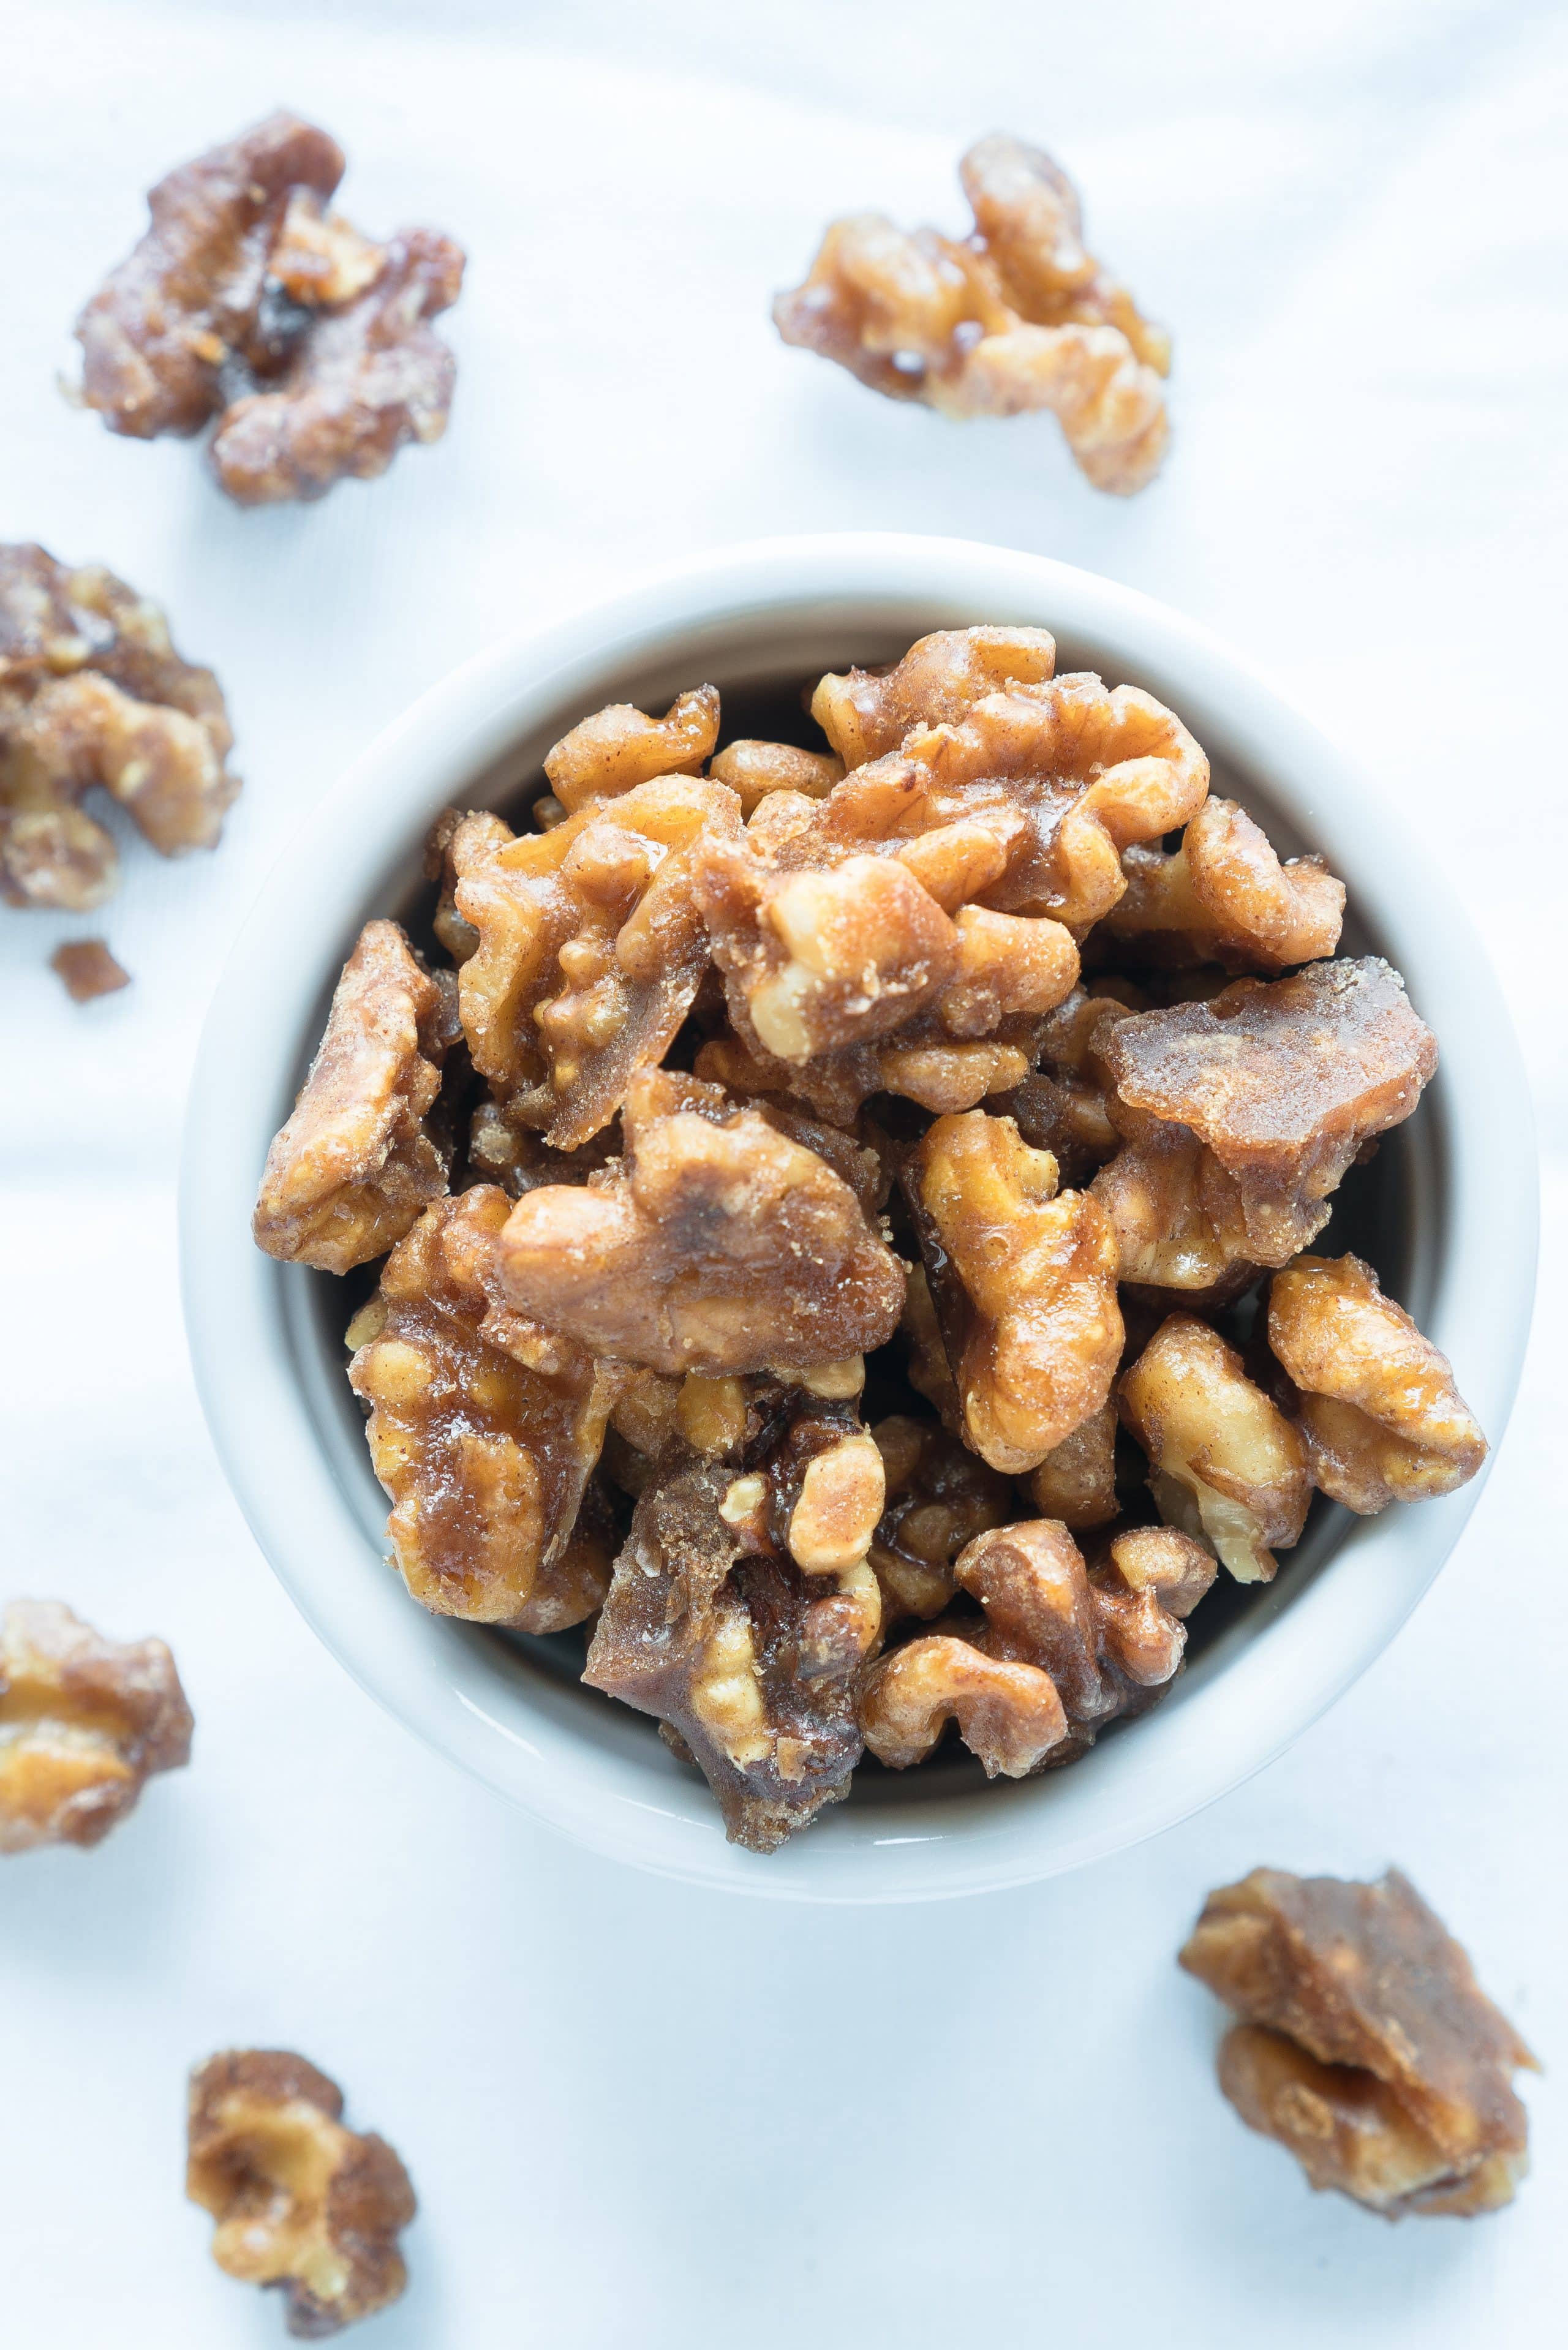 Maple Glazed Walnuts – Easy 5-min recipe for Maple Glazed Walnuts! Naturally sweetened with no added oil using just walnuts, maple syrup, cinnamon, salt, and cayenne. Enjoy as a topping for salads, yogurt parfaits, or as a snack all on their own! ♥ | freeyourfork.com